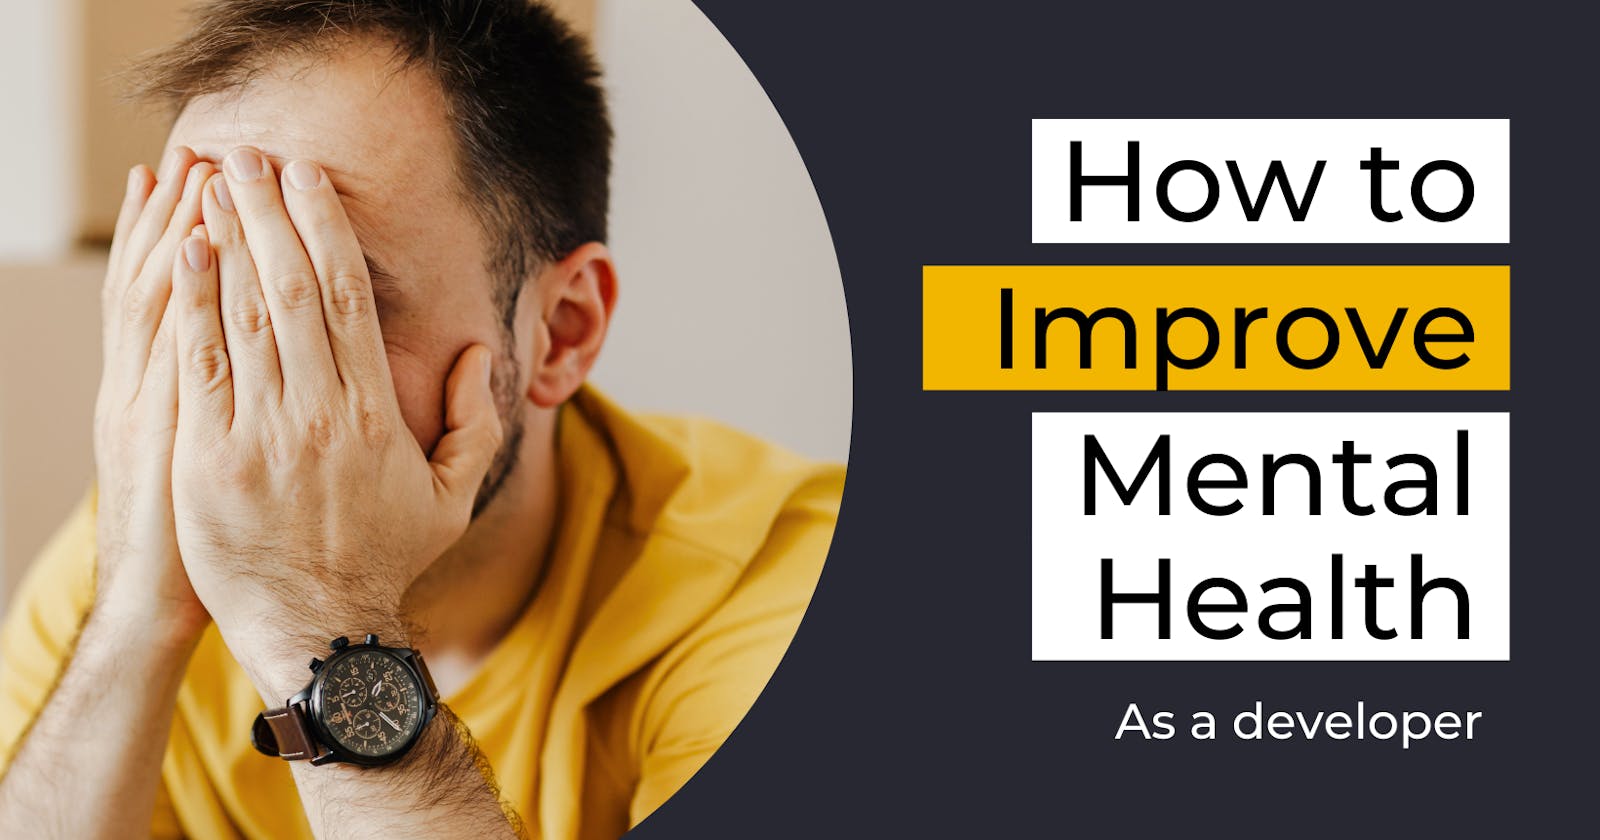 Take care of your Mental Health as a Developer